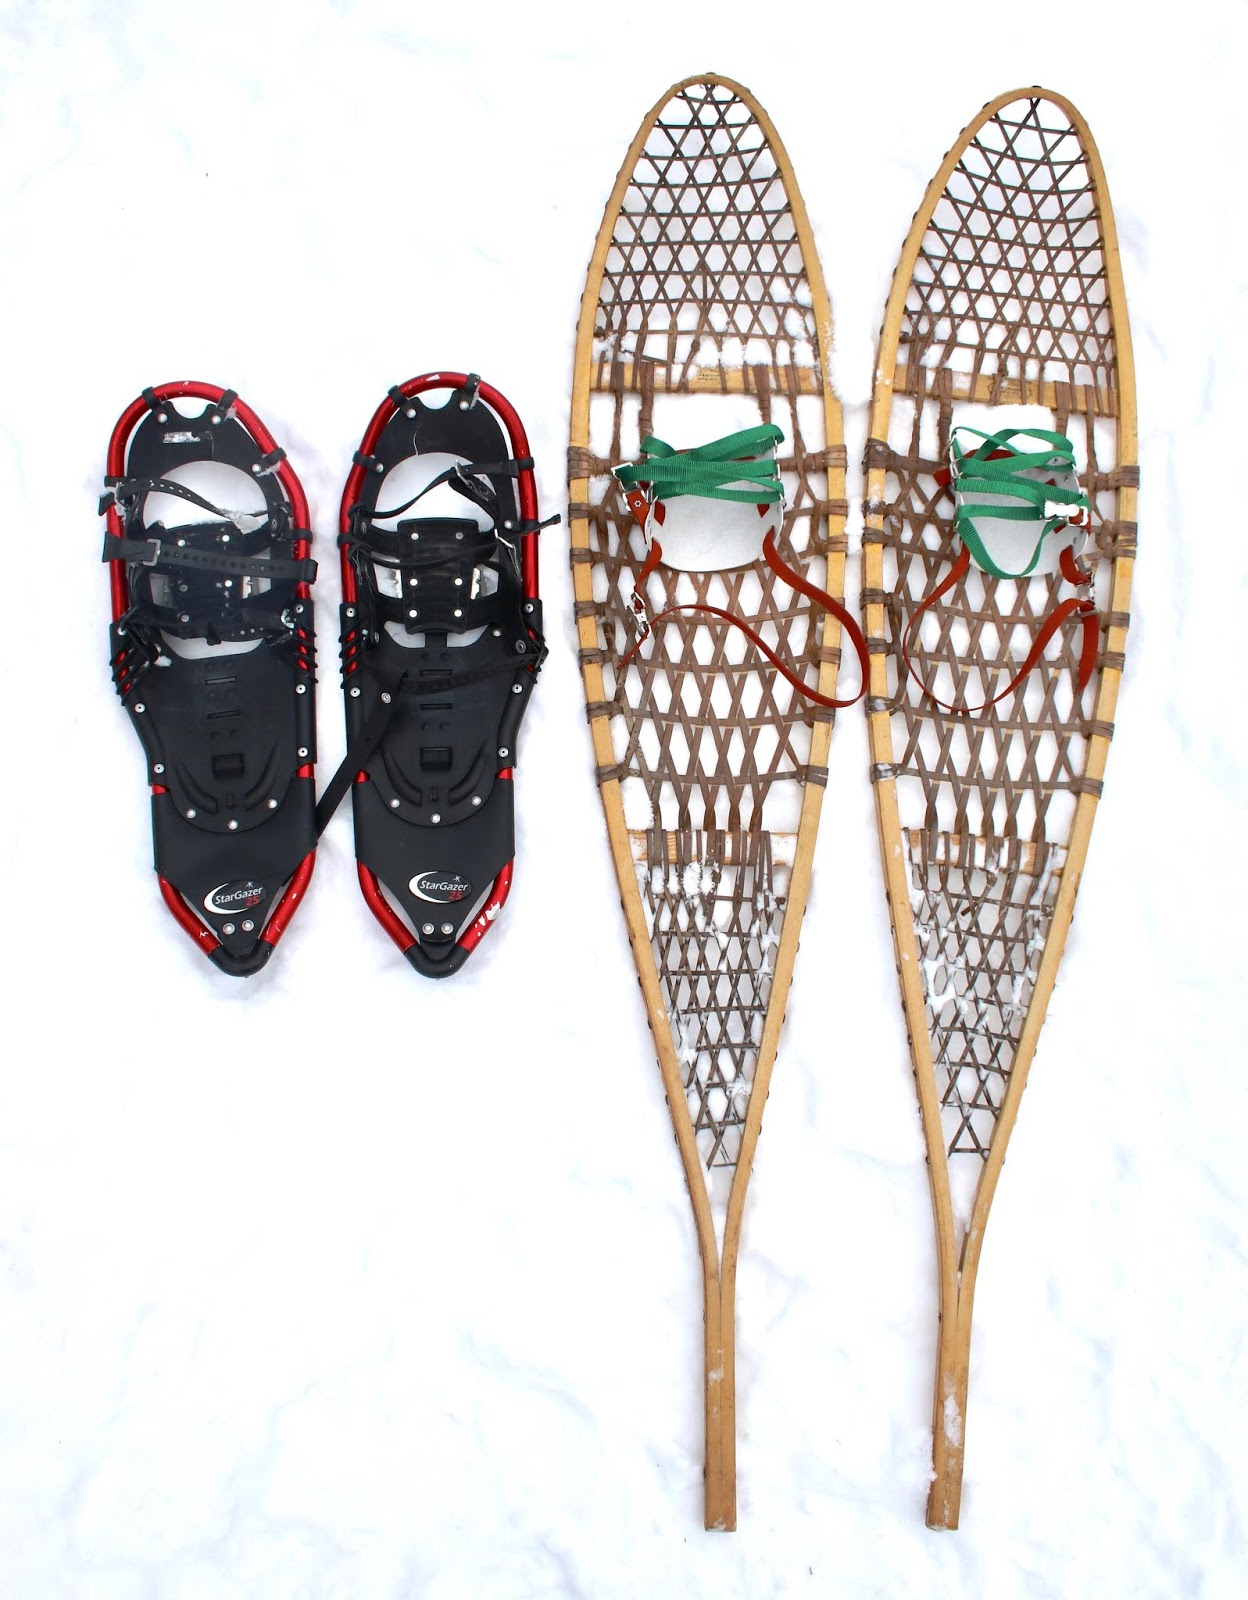 Fy Nyth: Best Snowshoe for Deep Powder, New vs. Old Snowshoes